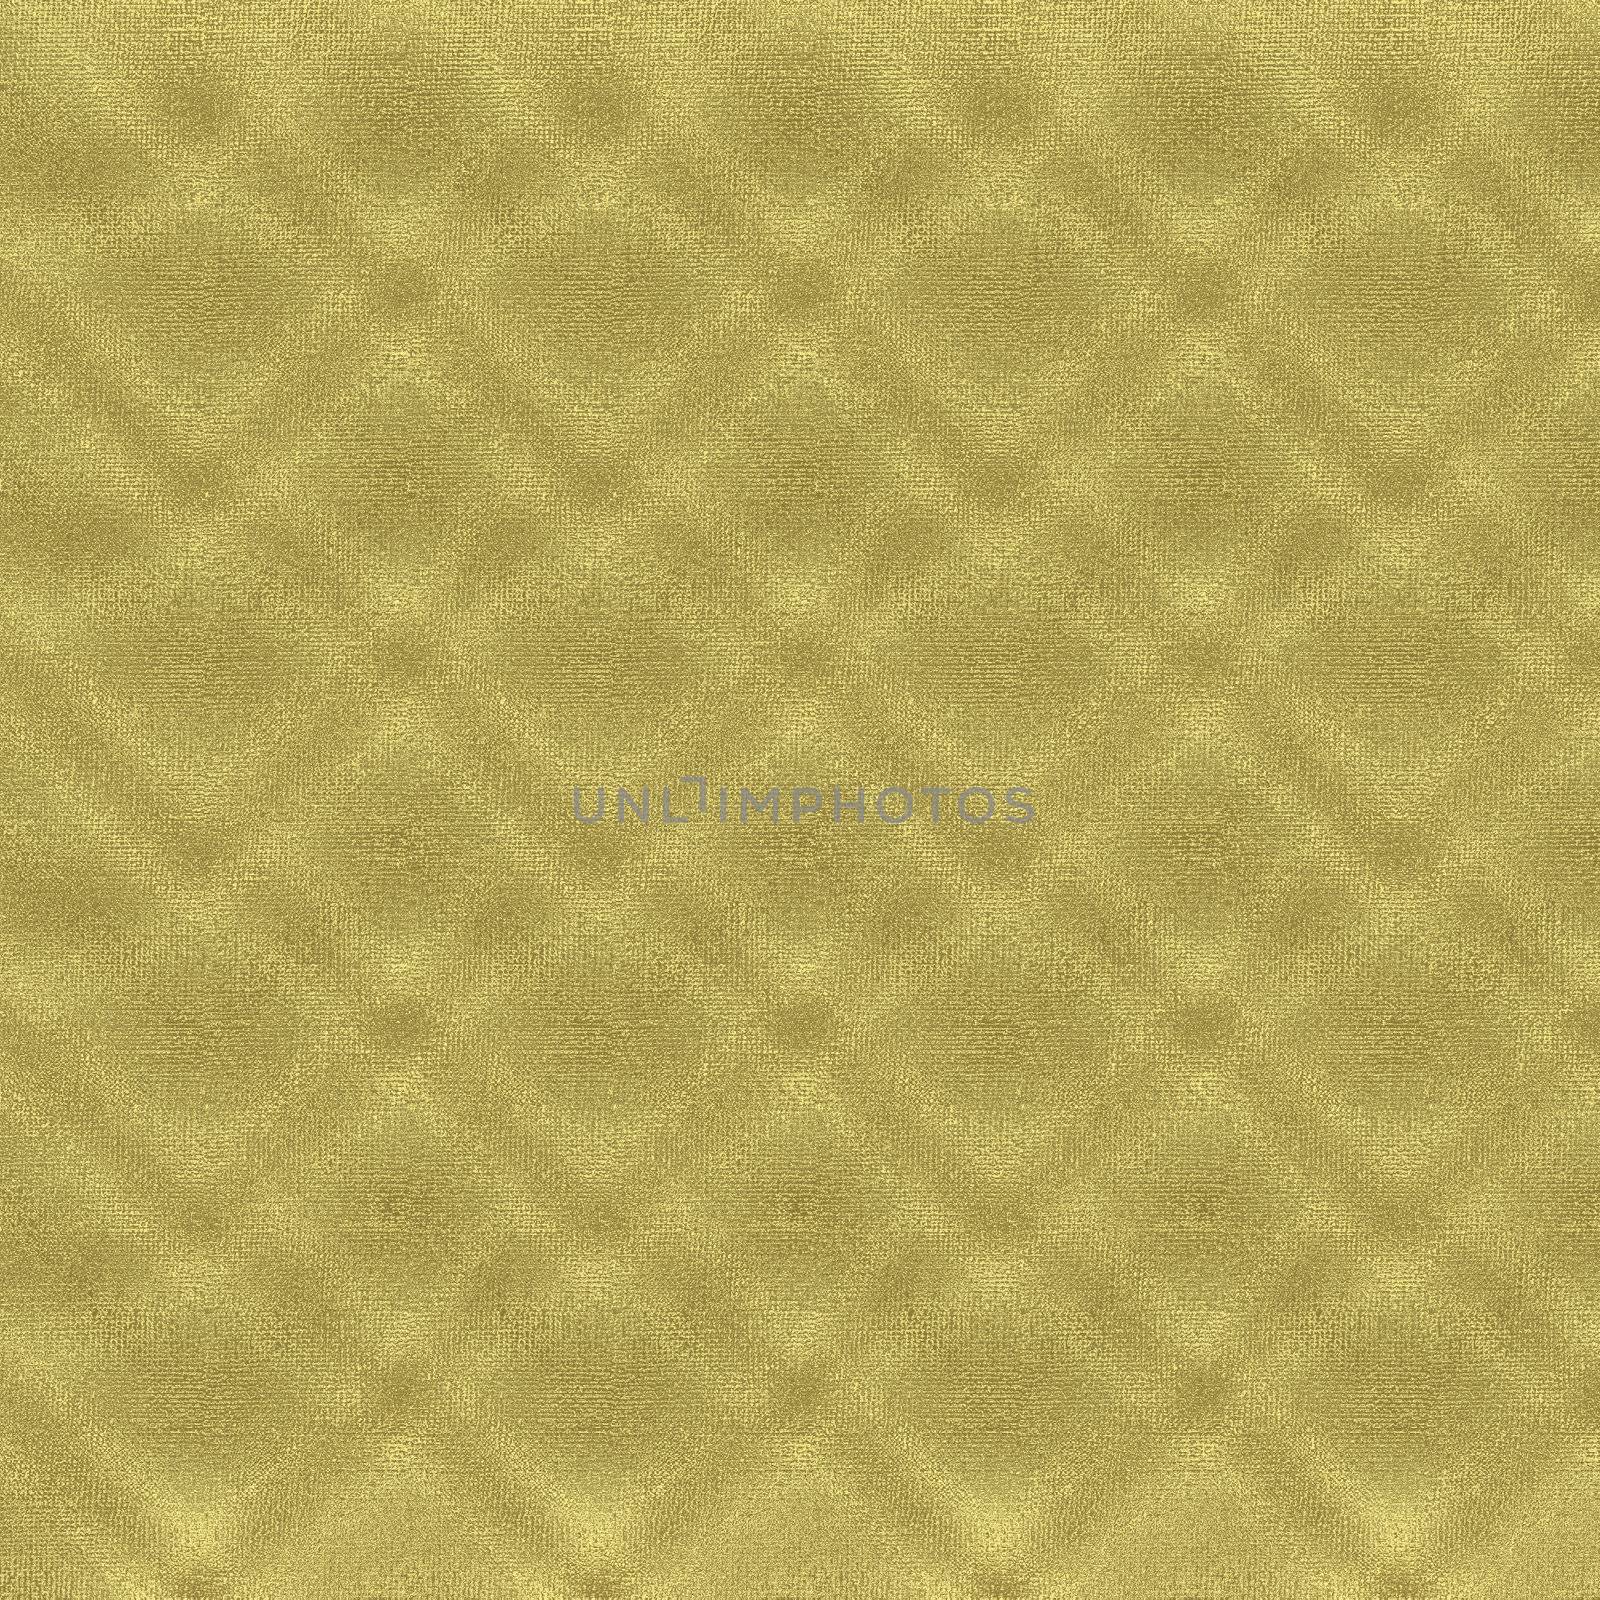 golden background with canvas texture